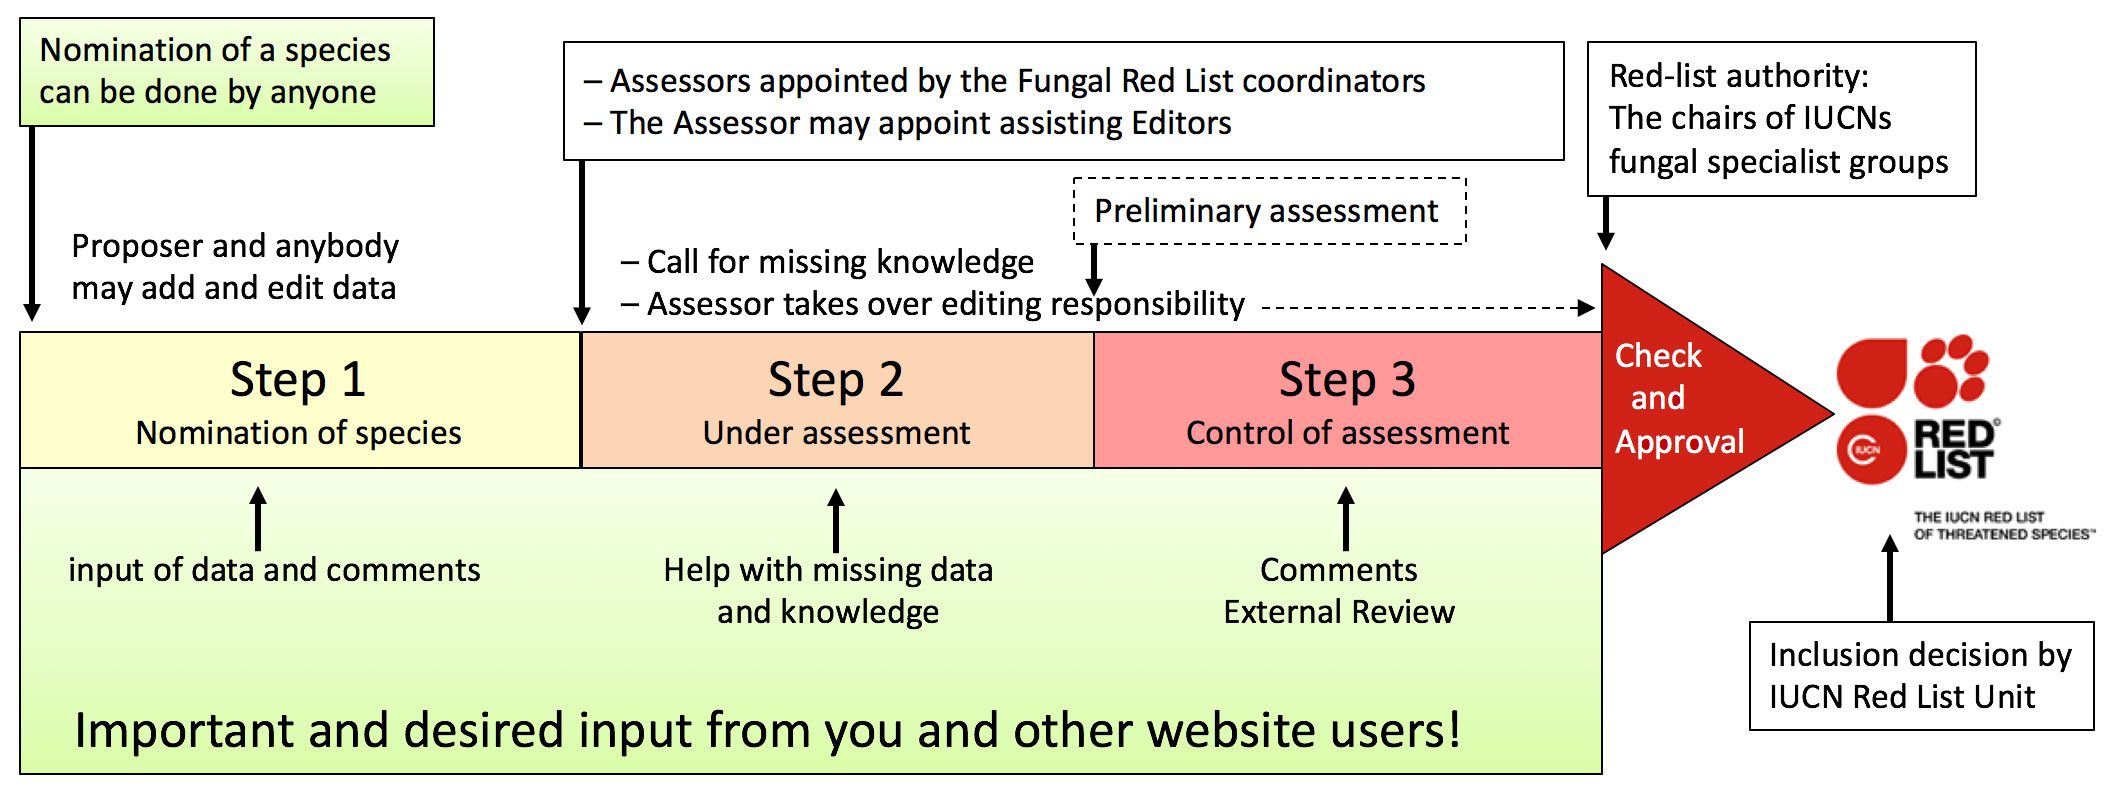 The Global Fungal Red List Initiative